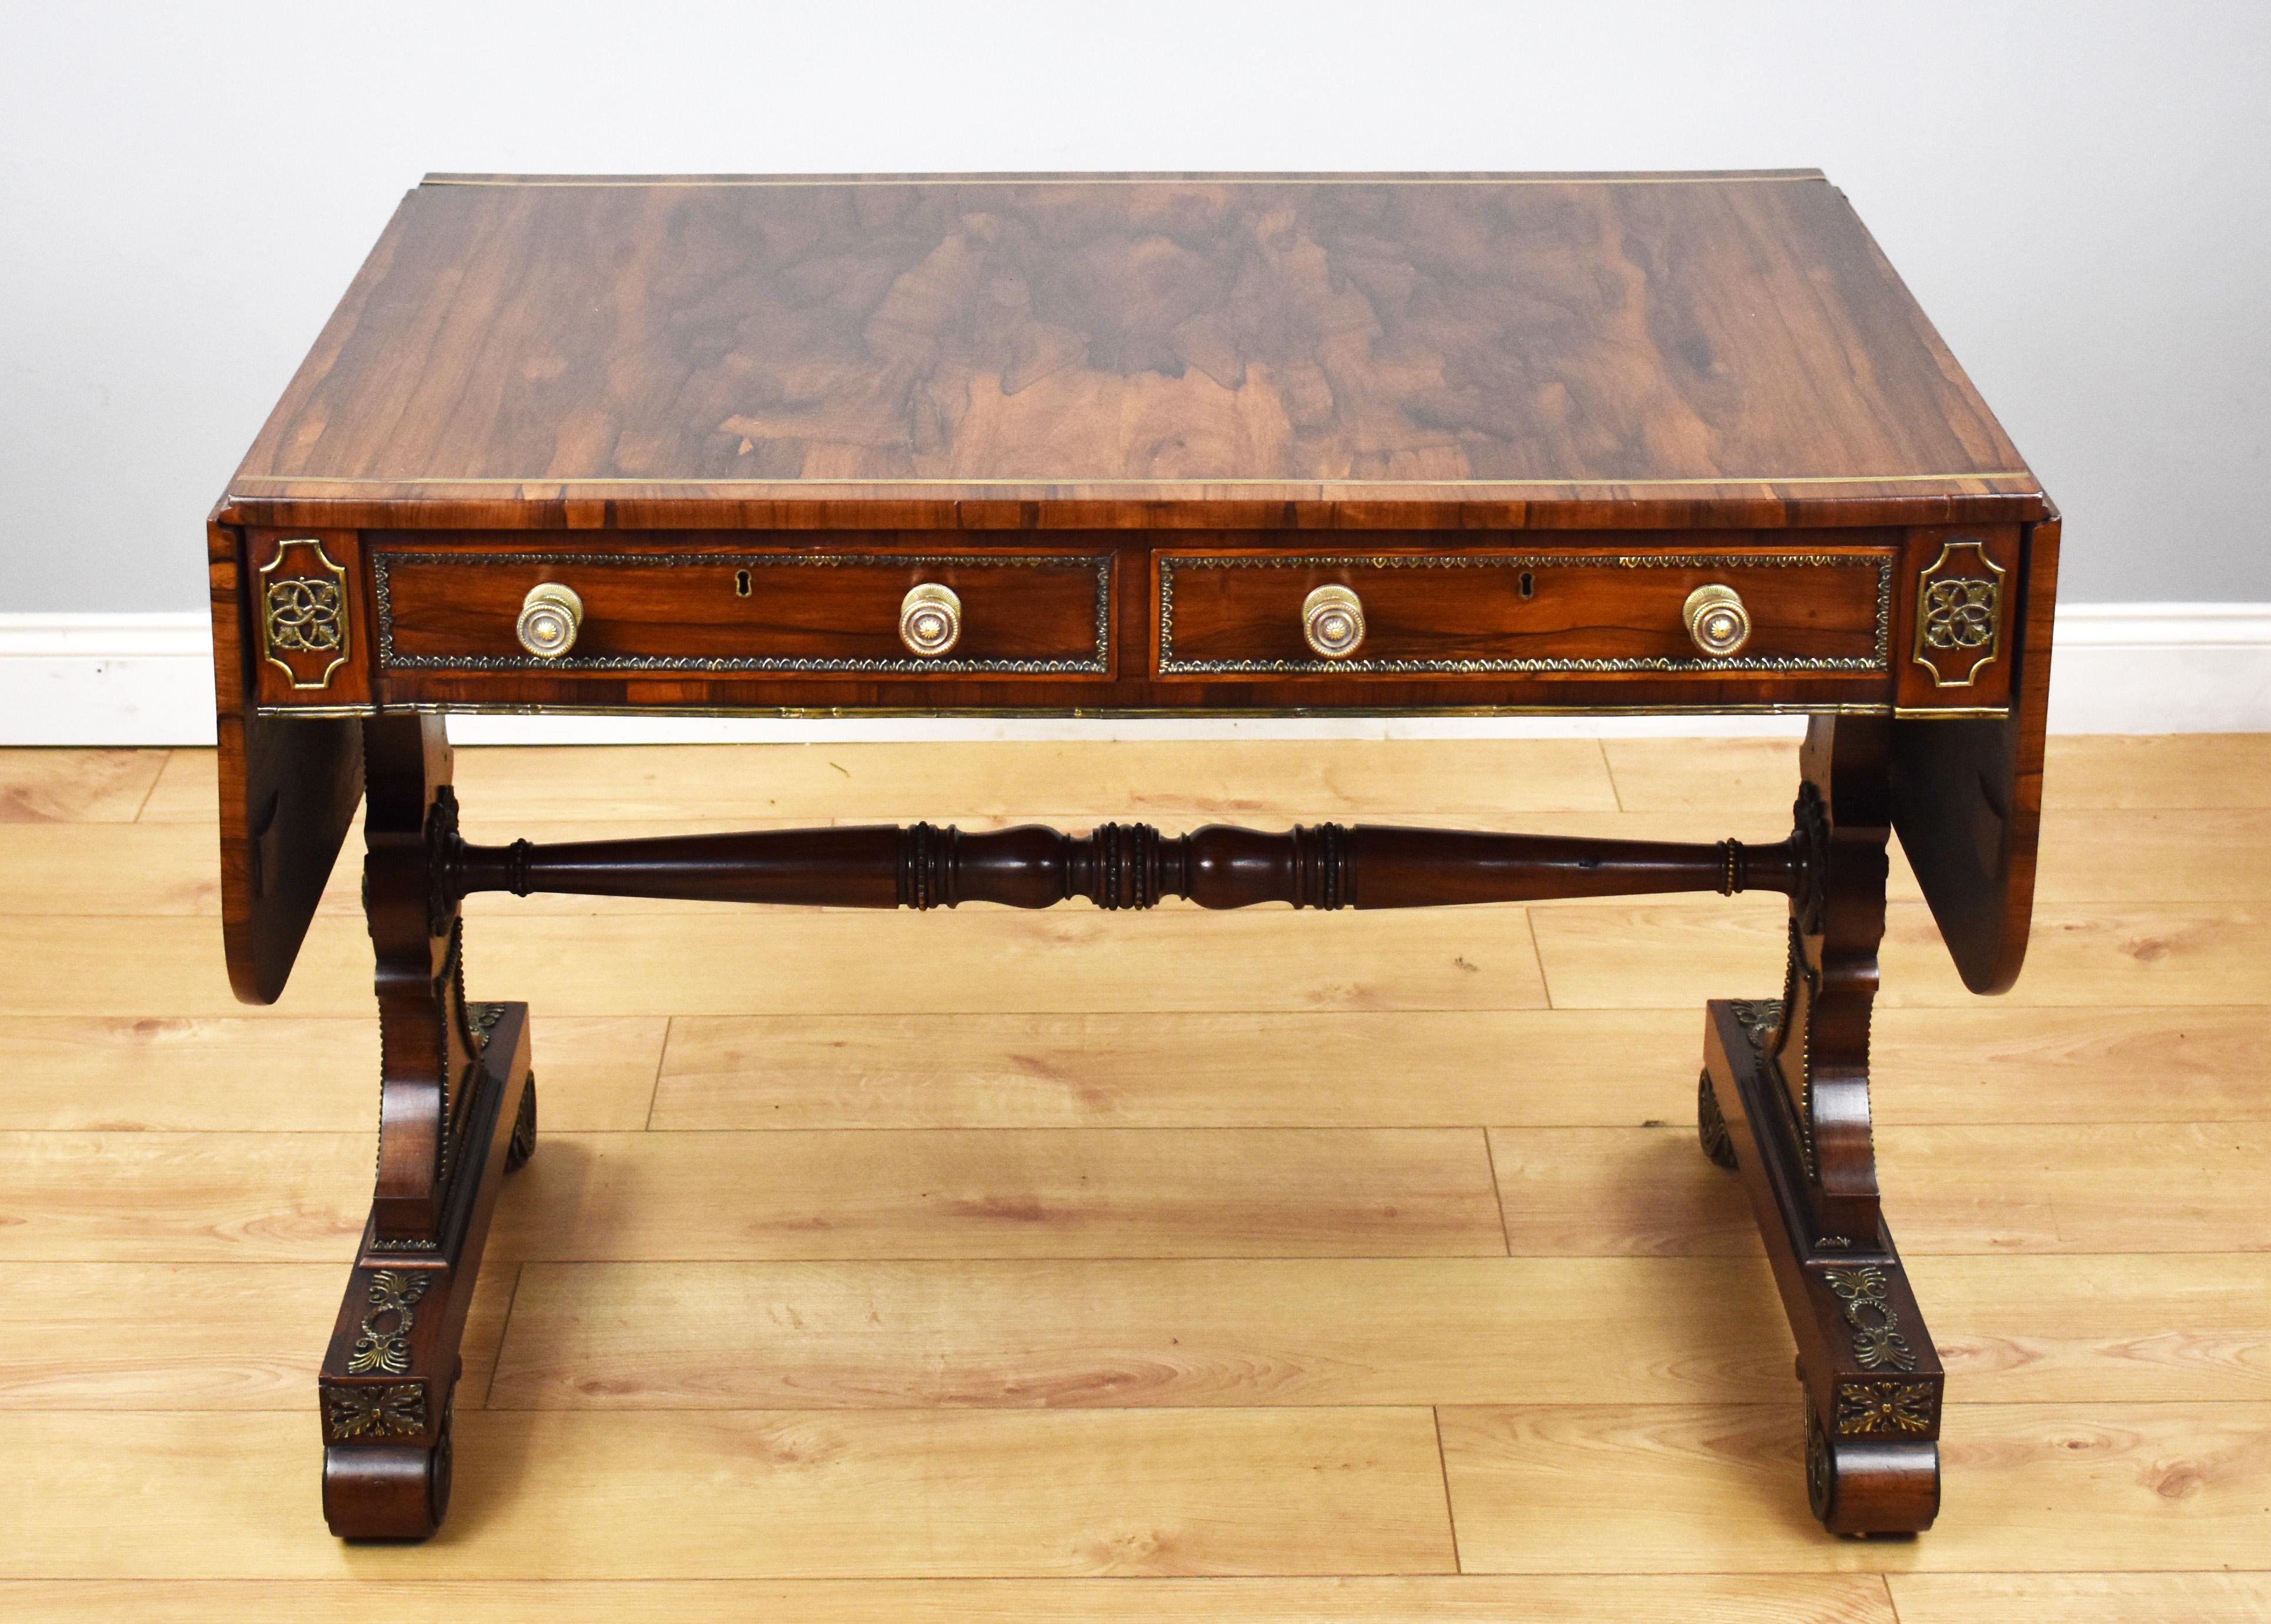 Inlay 19th Century English Regency Period Rosewood and Brass Inlaid Sofa Table